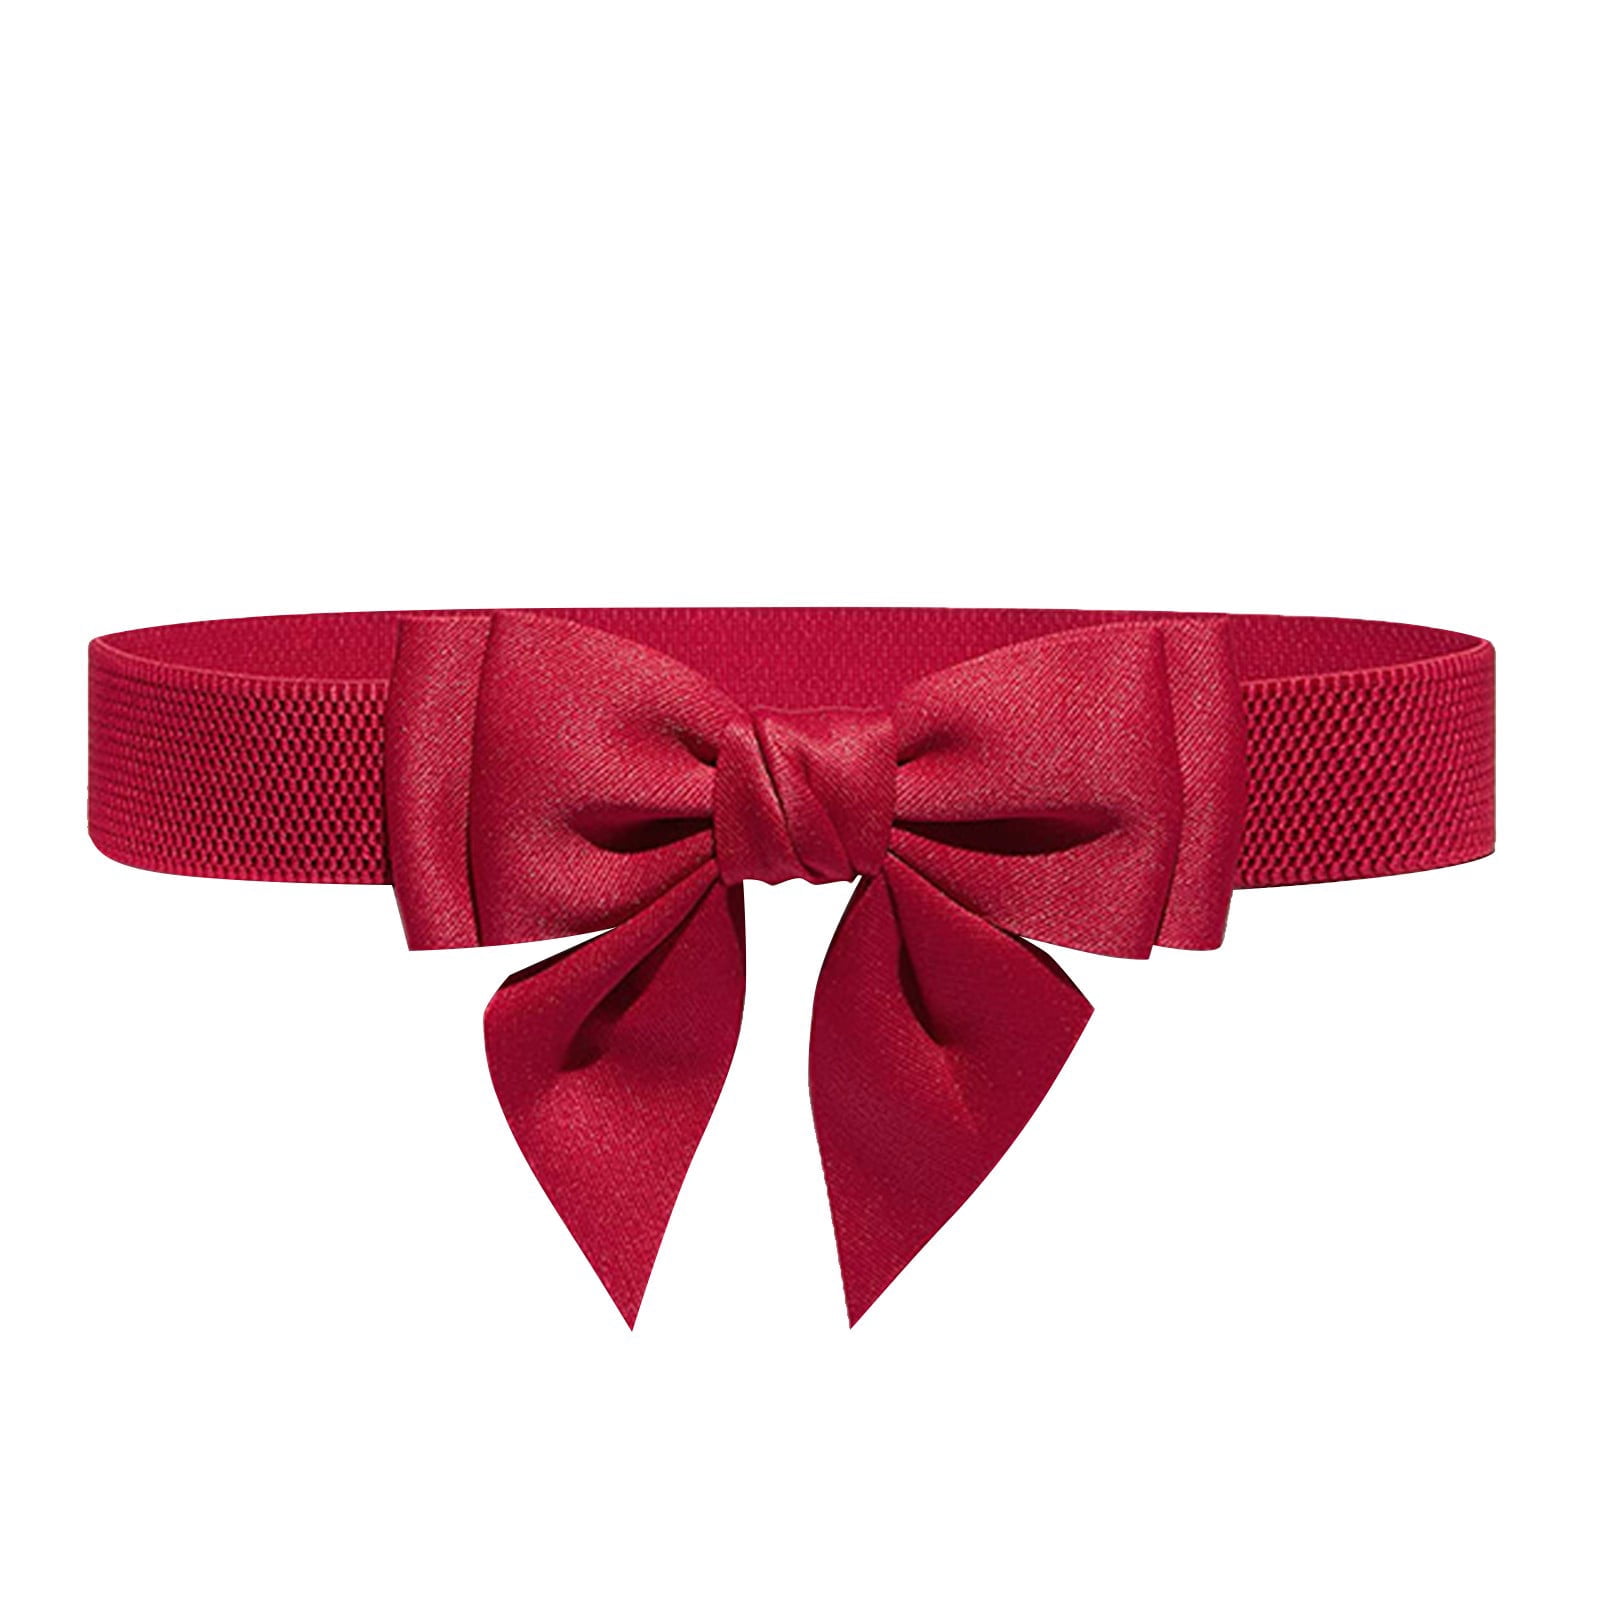 GINGHAM BOW RIBBON BELT 1 1/4 Red D Ring Buckle Classy Preppy Custom Size  NEW